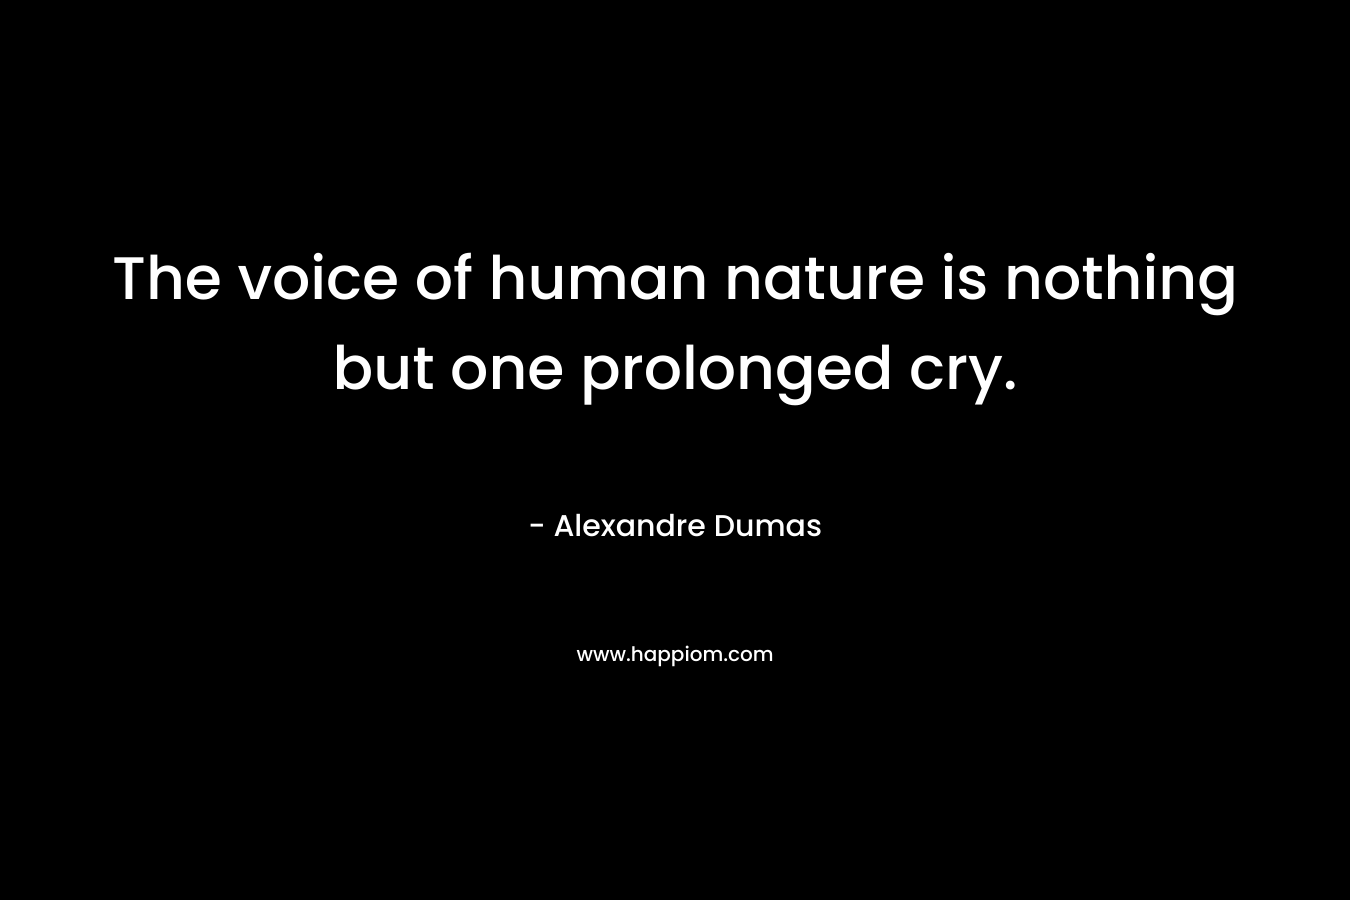 The voice of human nature is nothing but one prolonged cry. – Alexandre Dumas